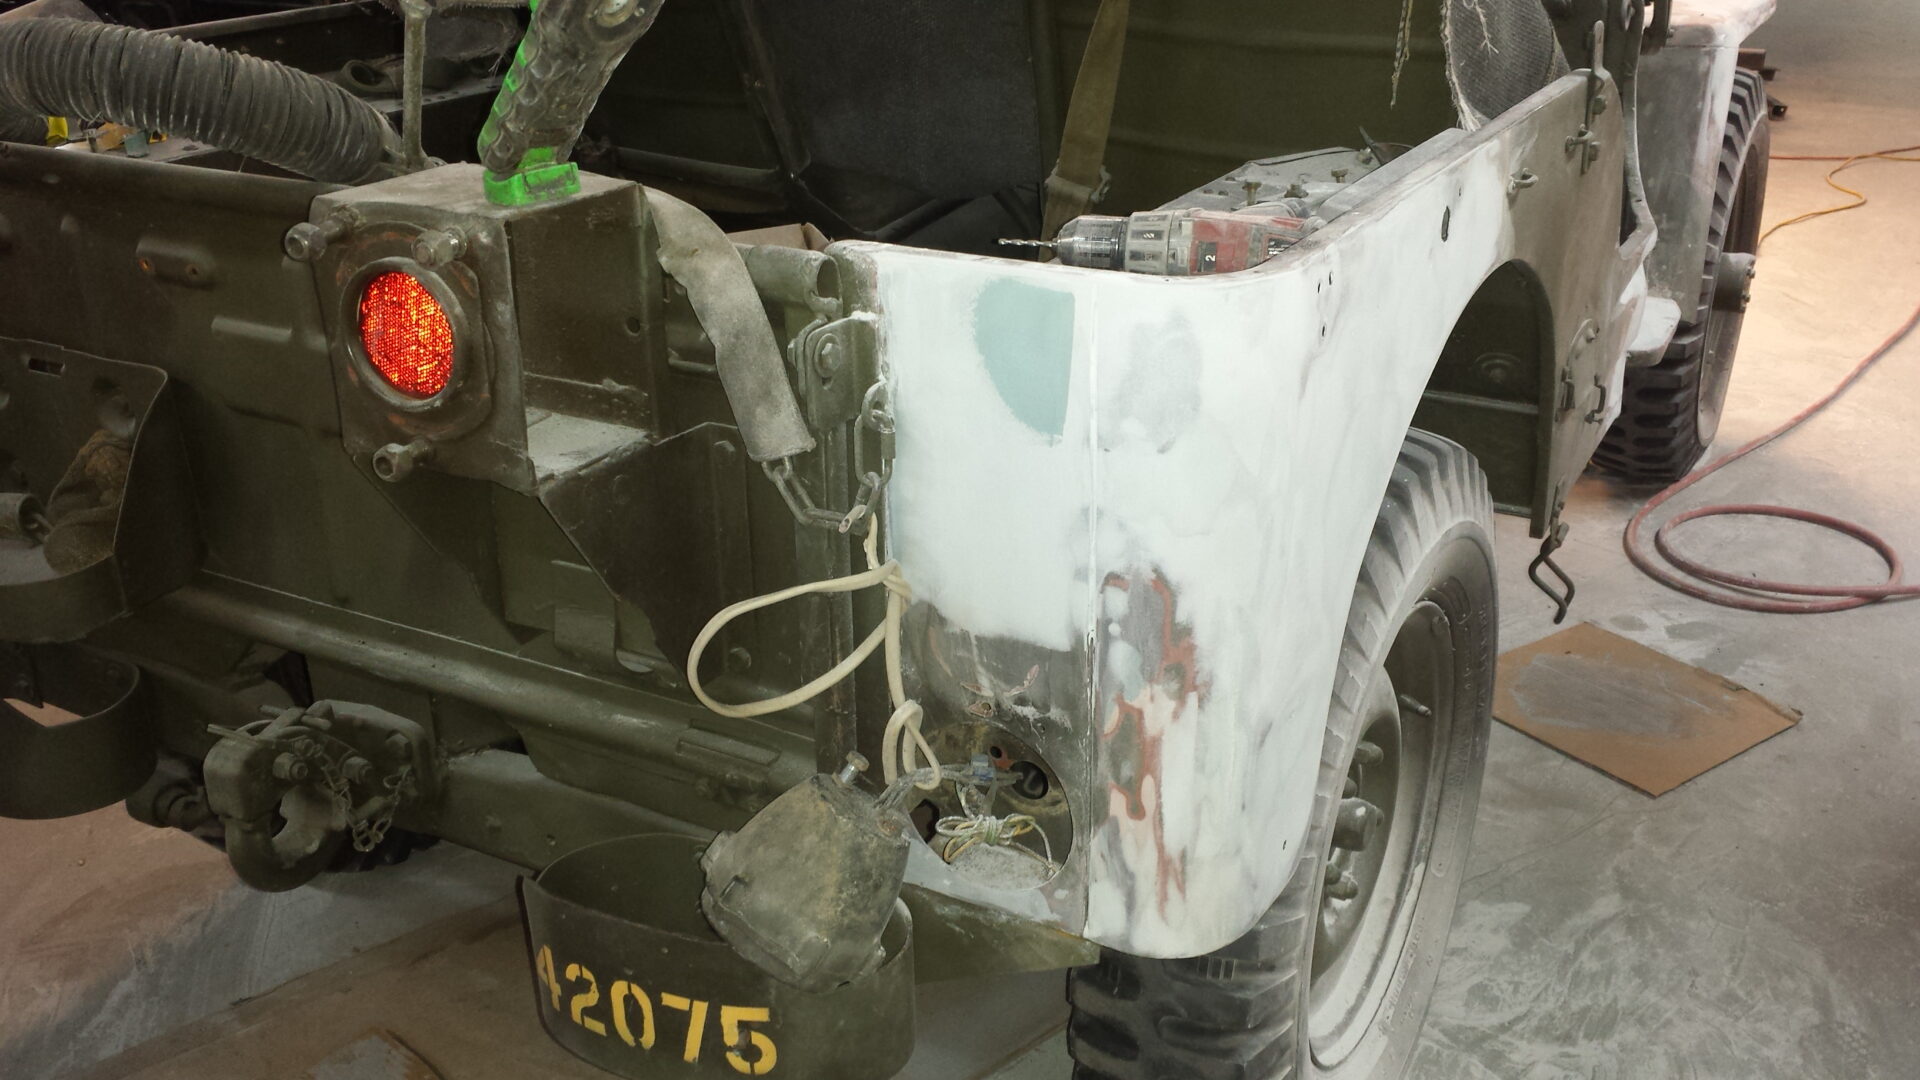 Restoring the rear of the 1951 military jeep model